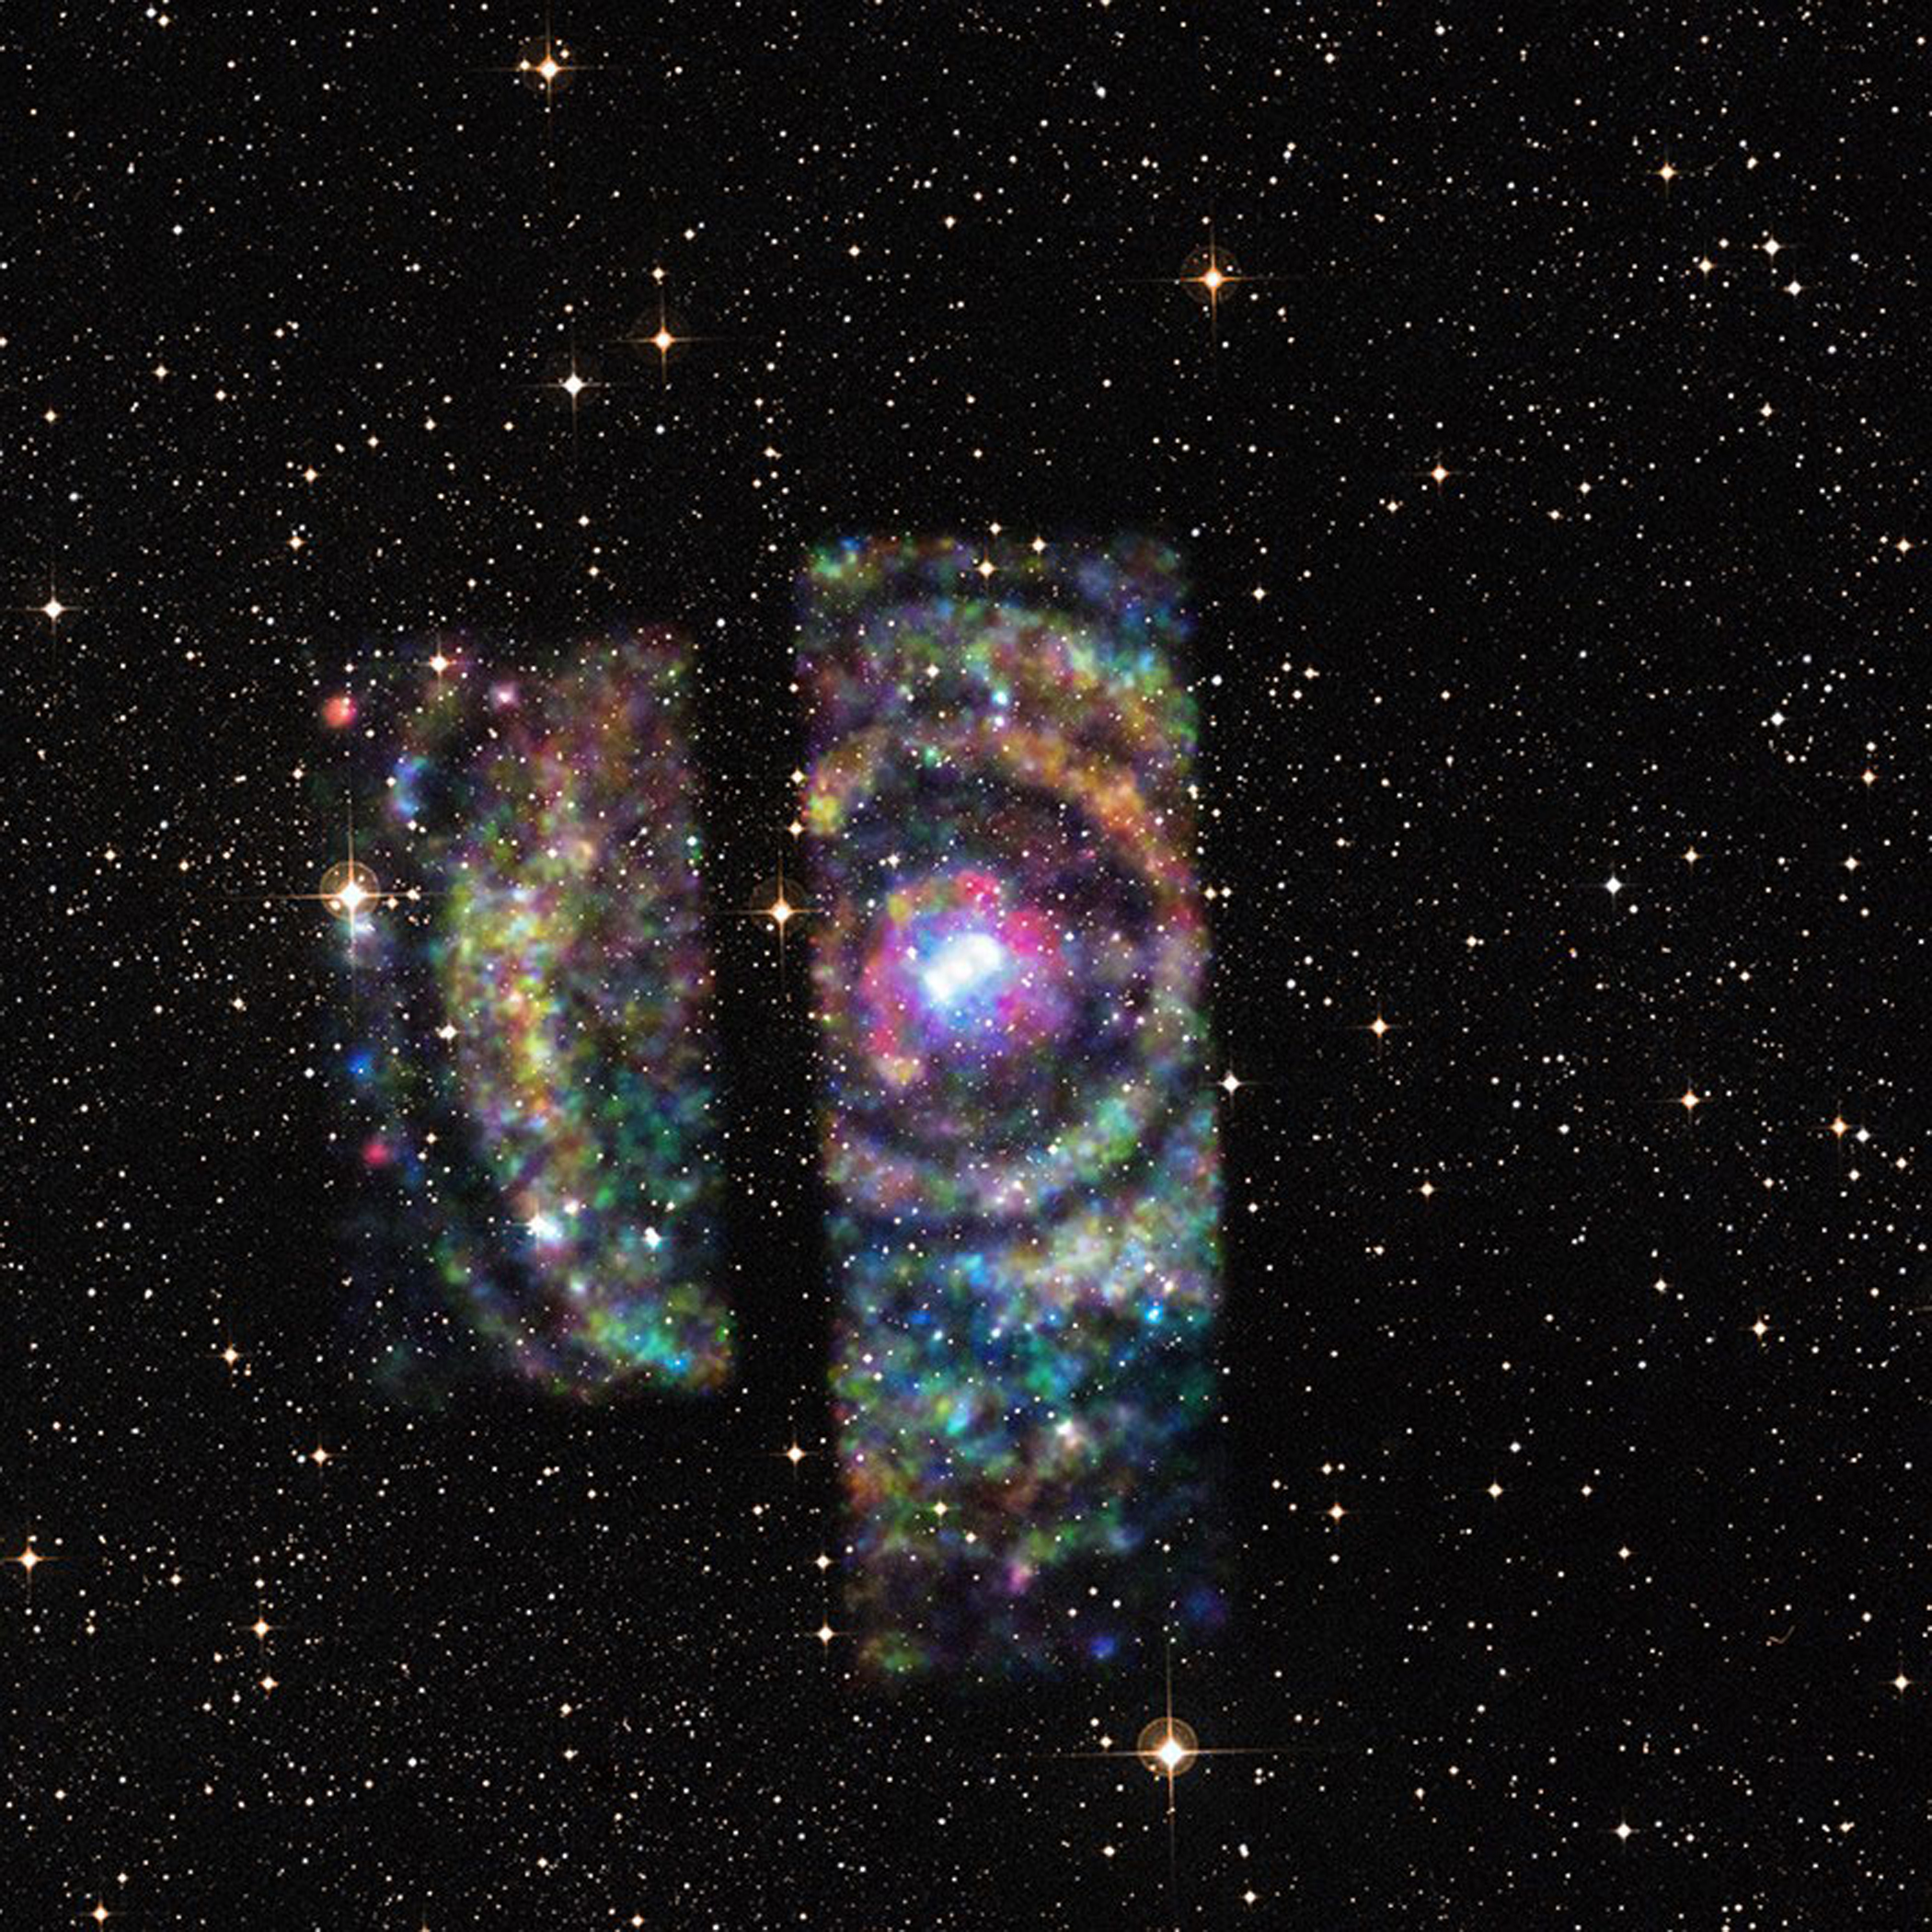 Circinus X-1 is an X-ray binary star known for its erratic variability can be seen in this photo released on June 23, 2015. Within the system, a dense neutron star, the collapsed remnant of a supernova explosion, orbits with a more ordinary stellar companion Circinus X-1 30,700 light-years away.